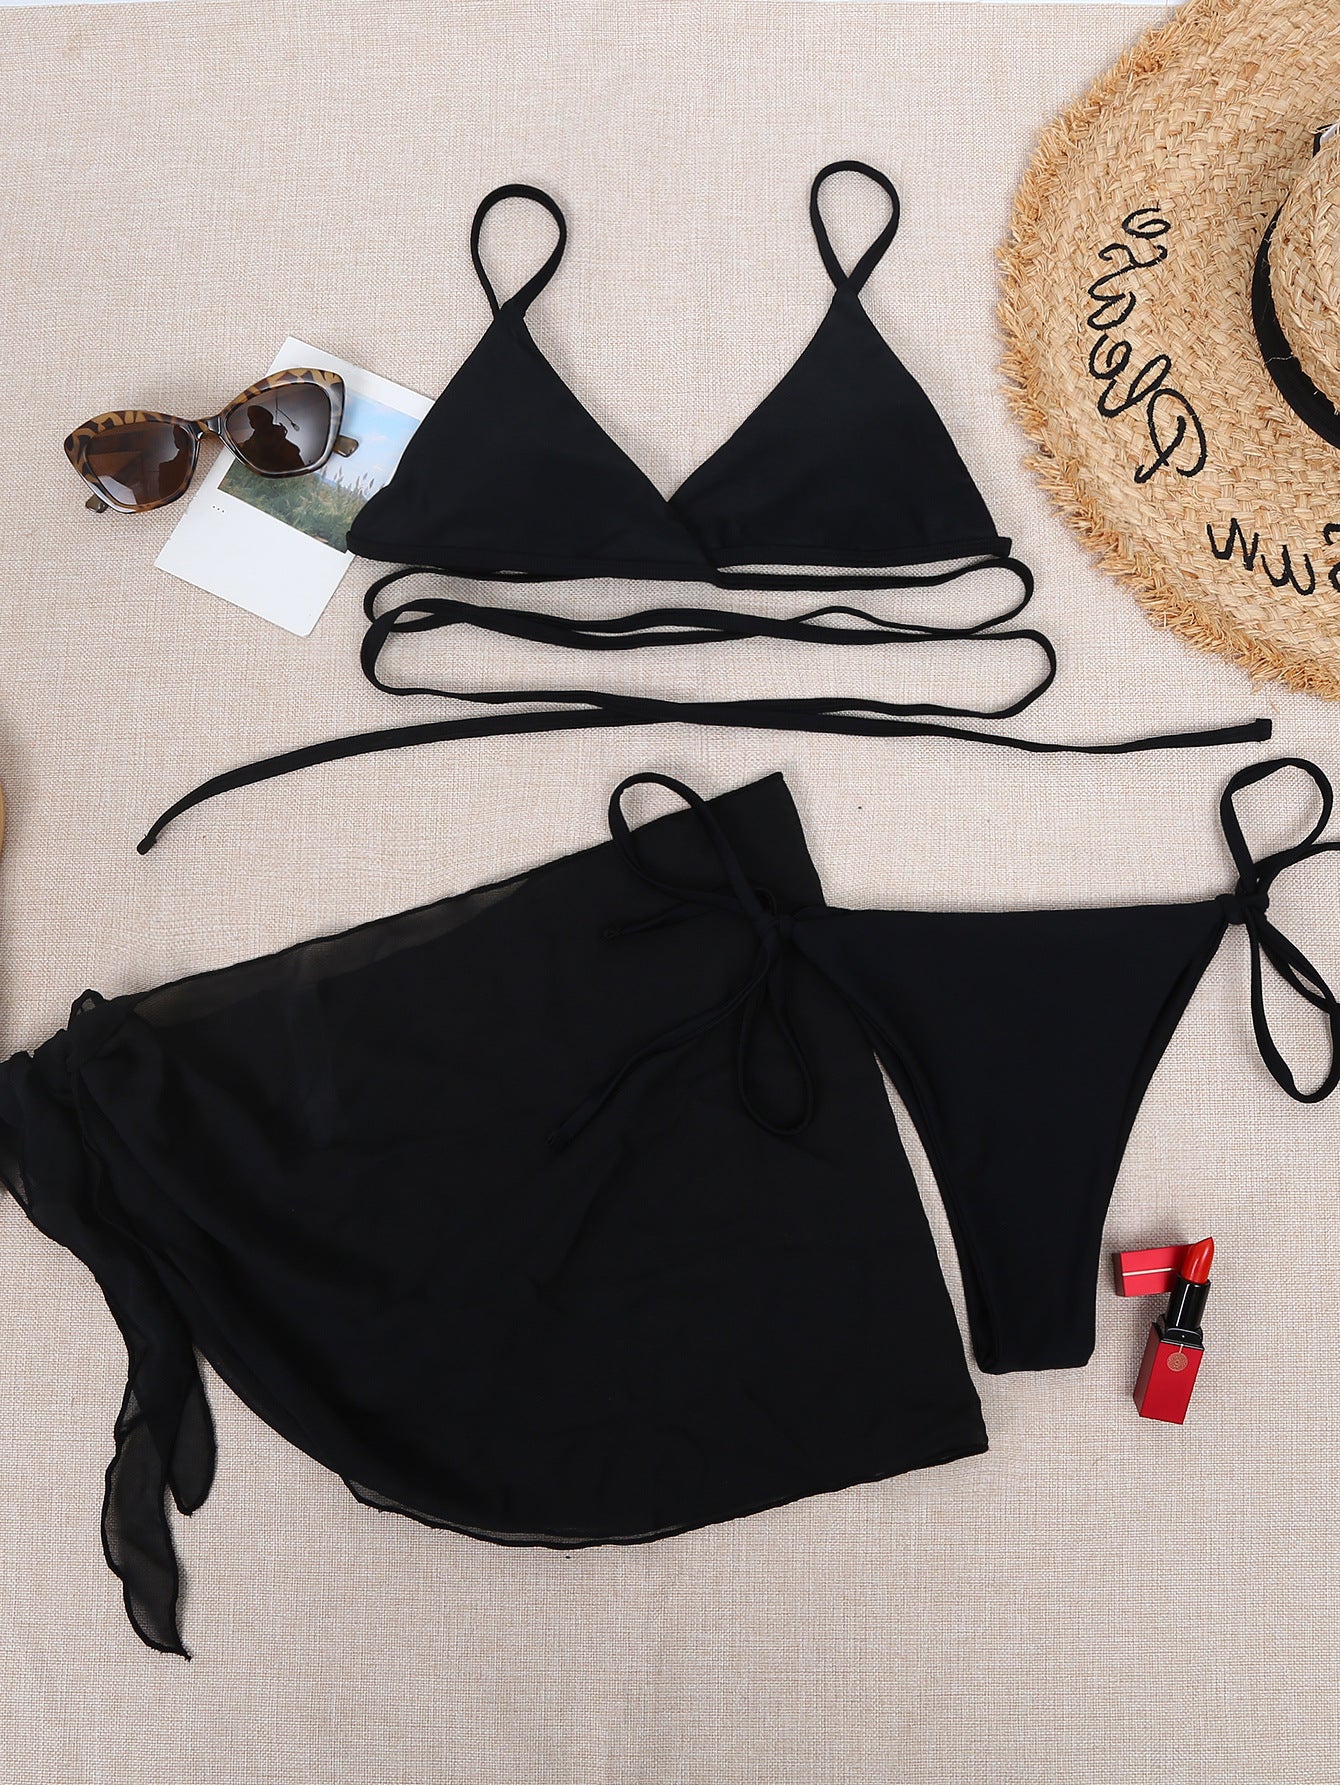 Solid Color Bikini Chiffon Cover Skirt  Swimsuit Three Piece Swimsuit apparel & accessories